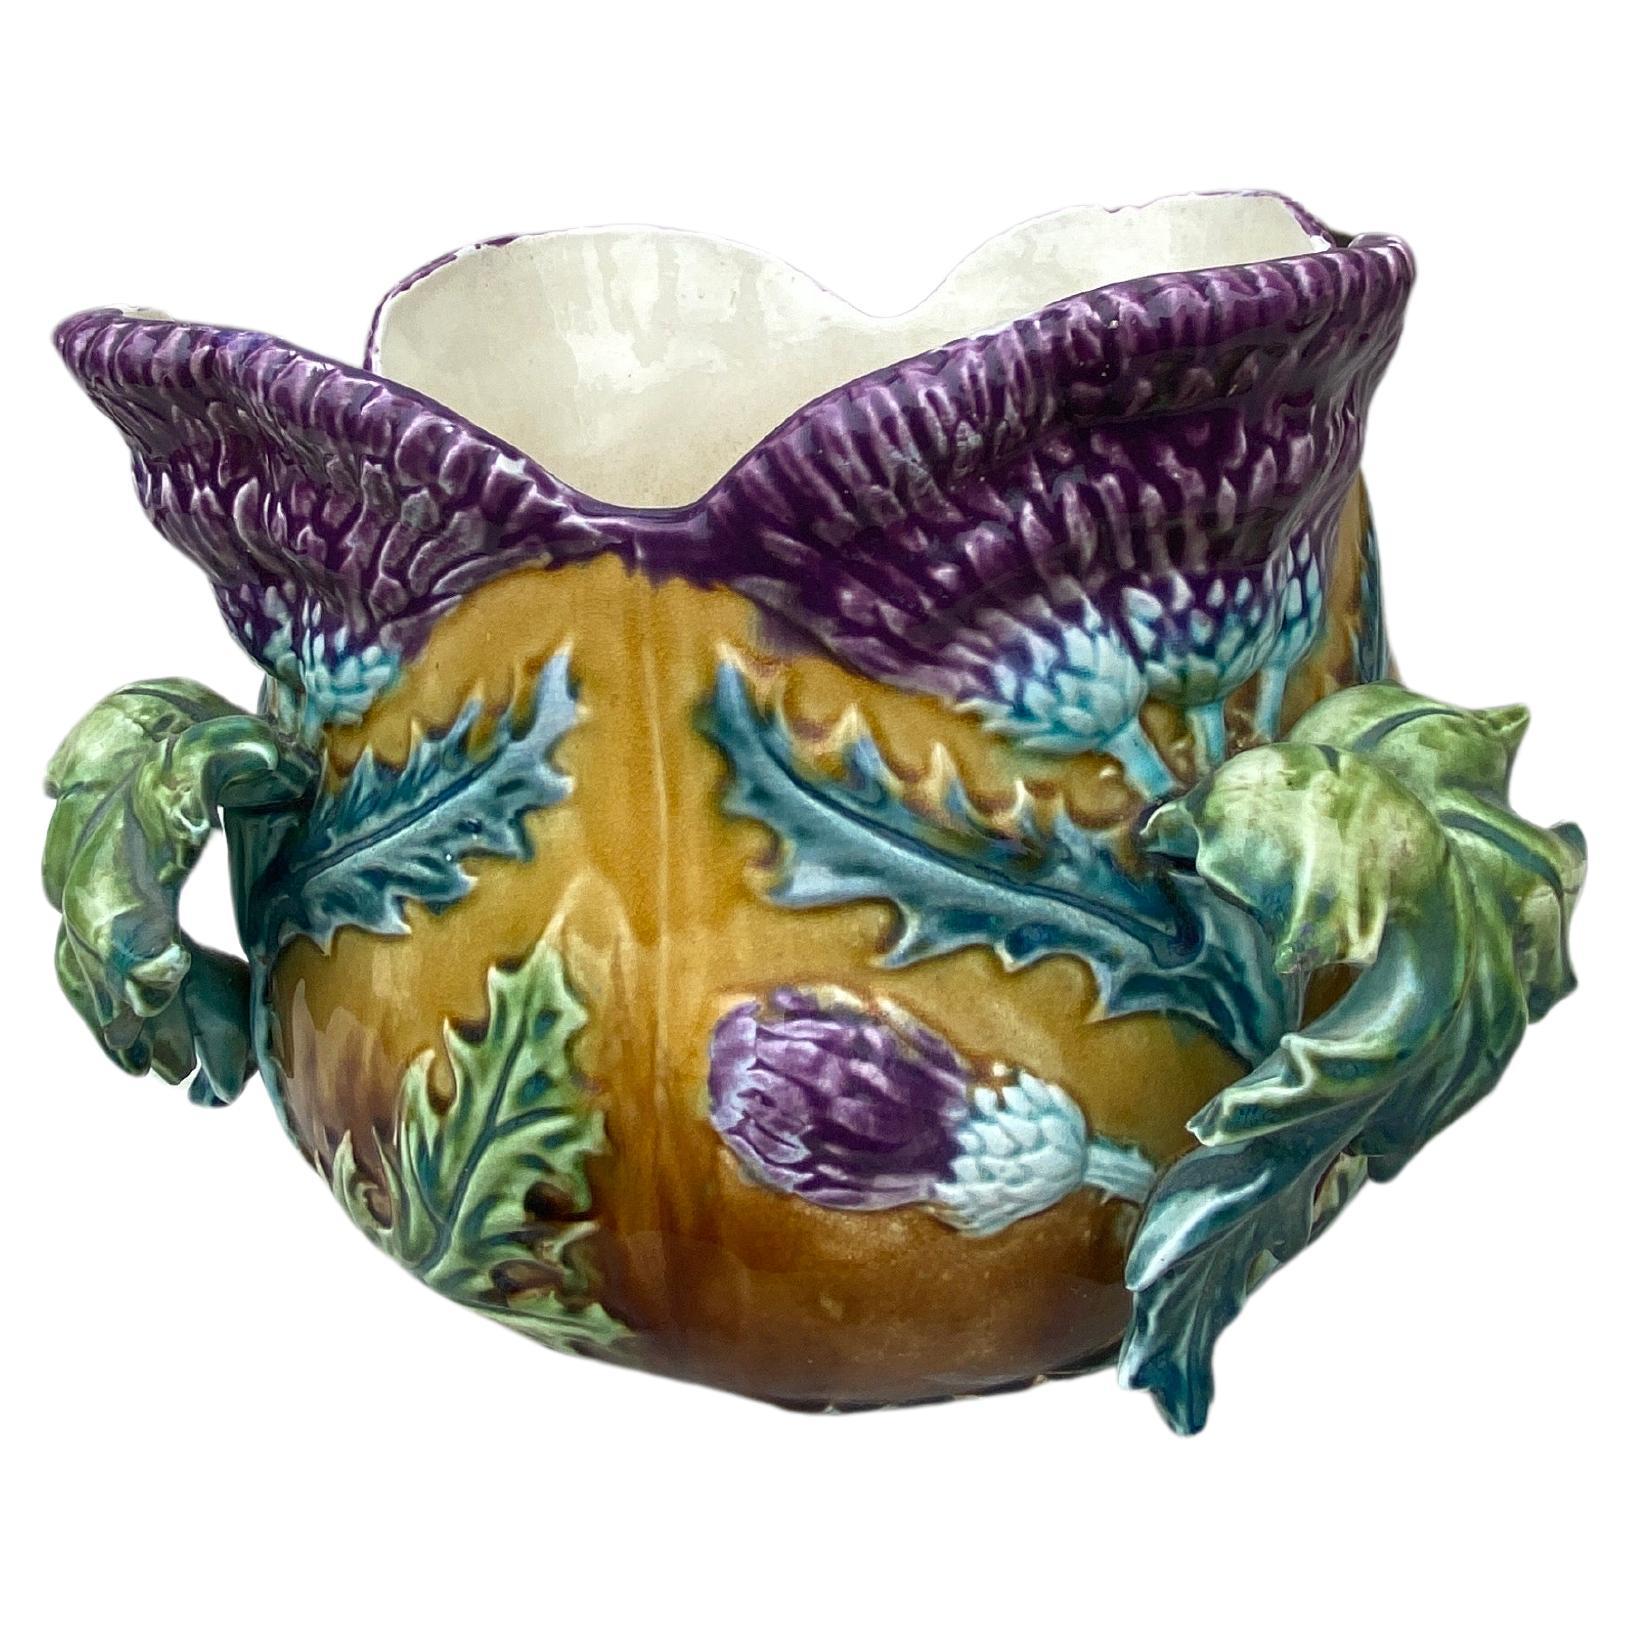 Large Majolica thistle jardinière Onnaing, circa 1880.
Height / 9 inches.
Diameter / 13 inches.